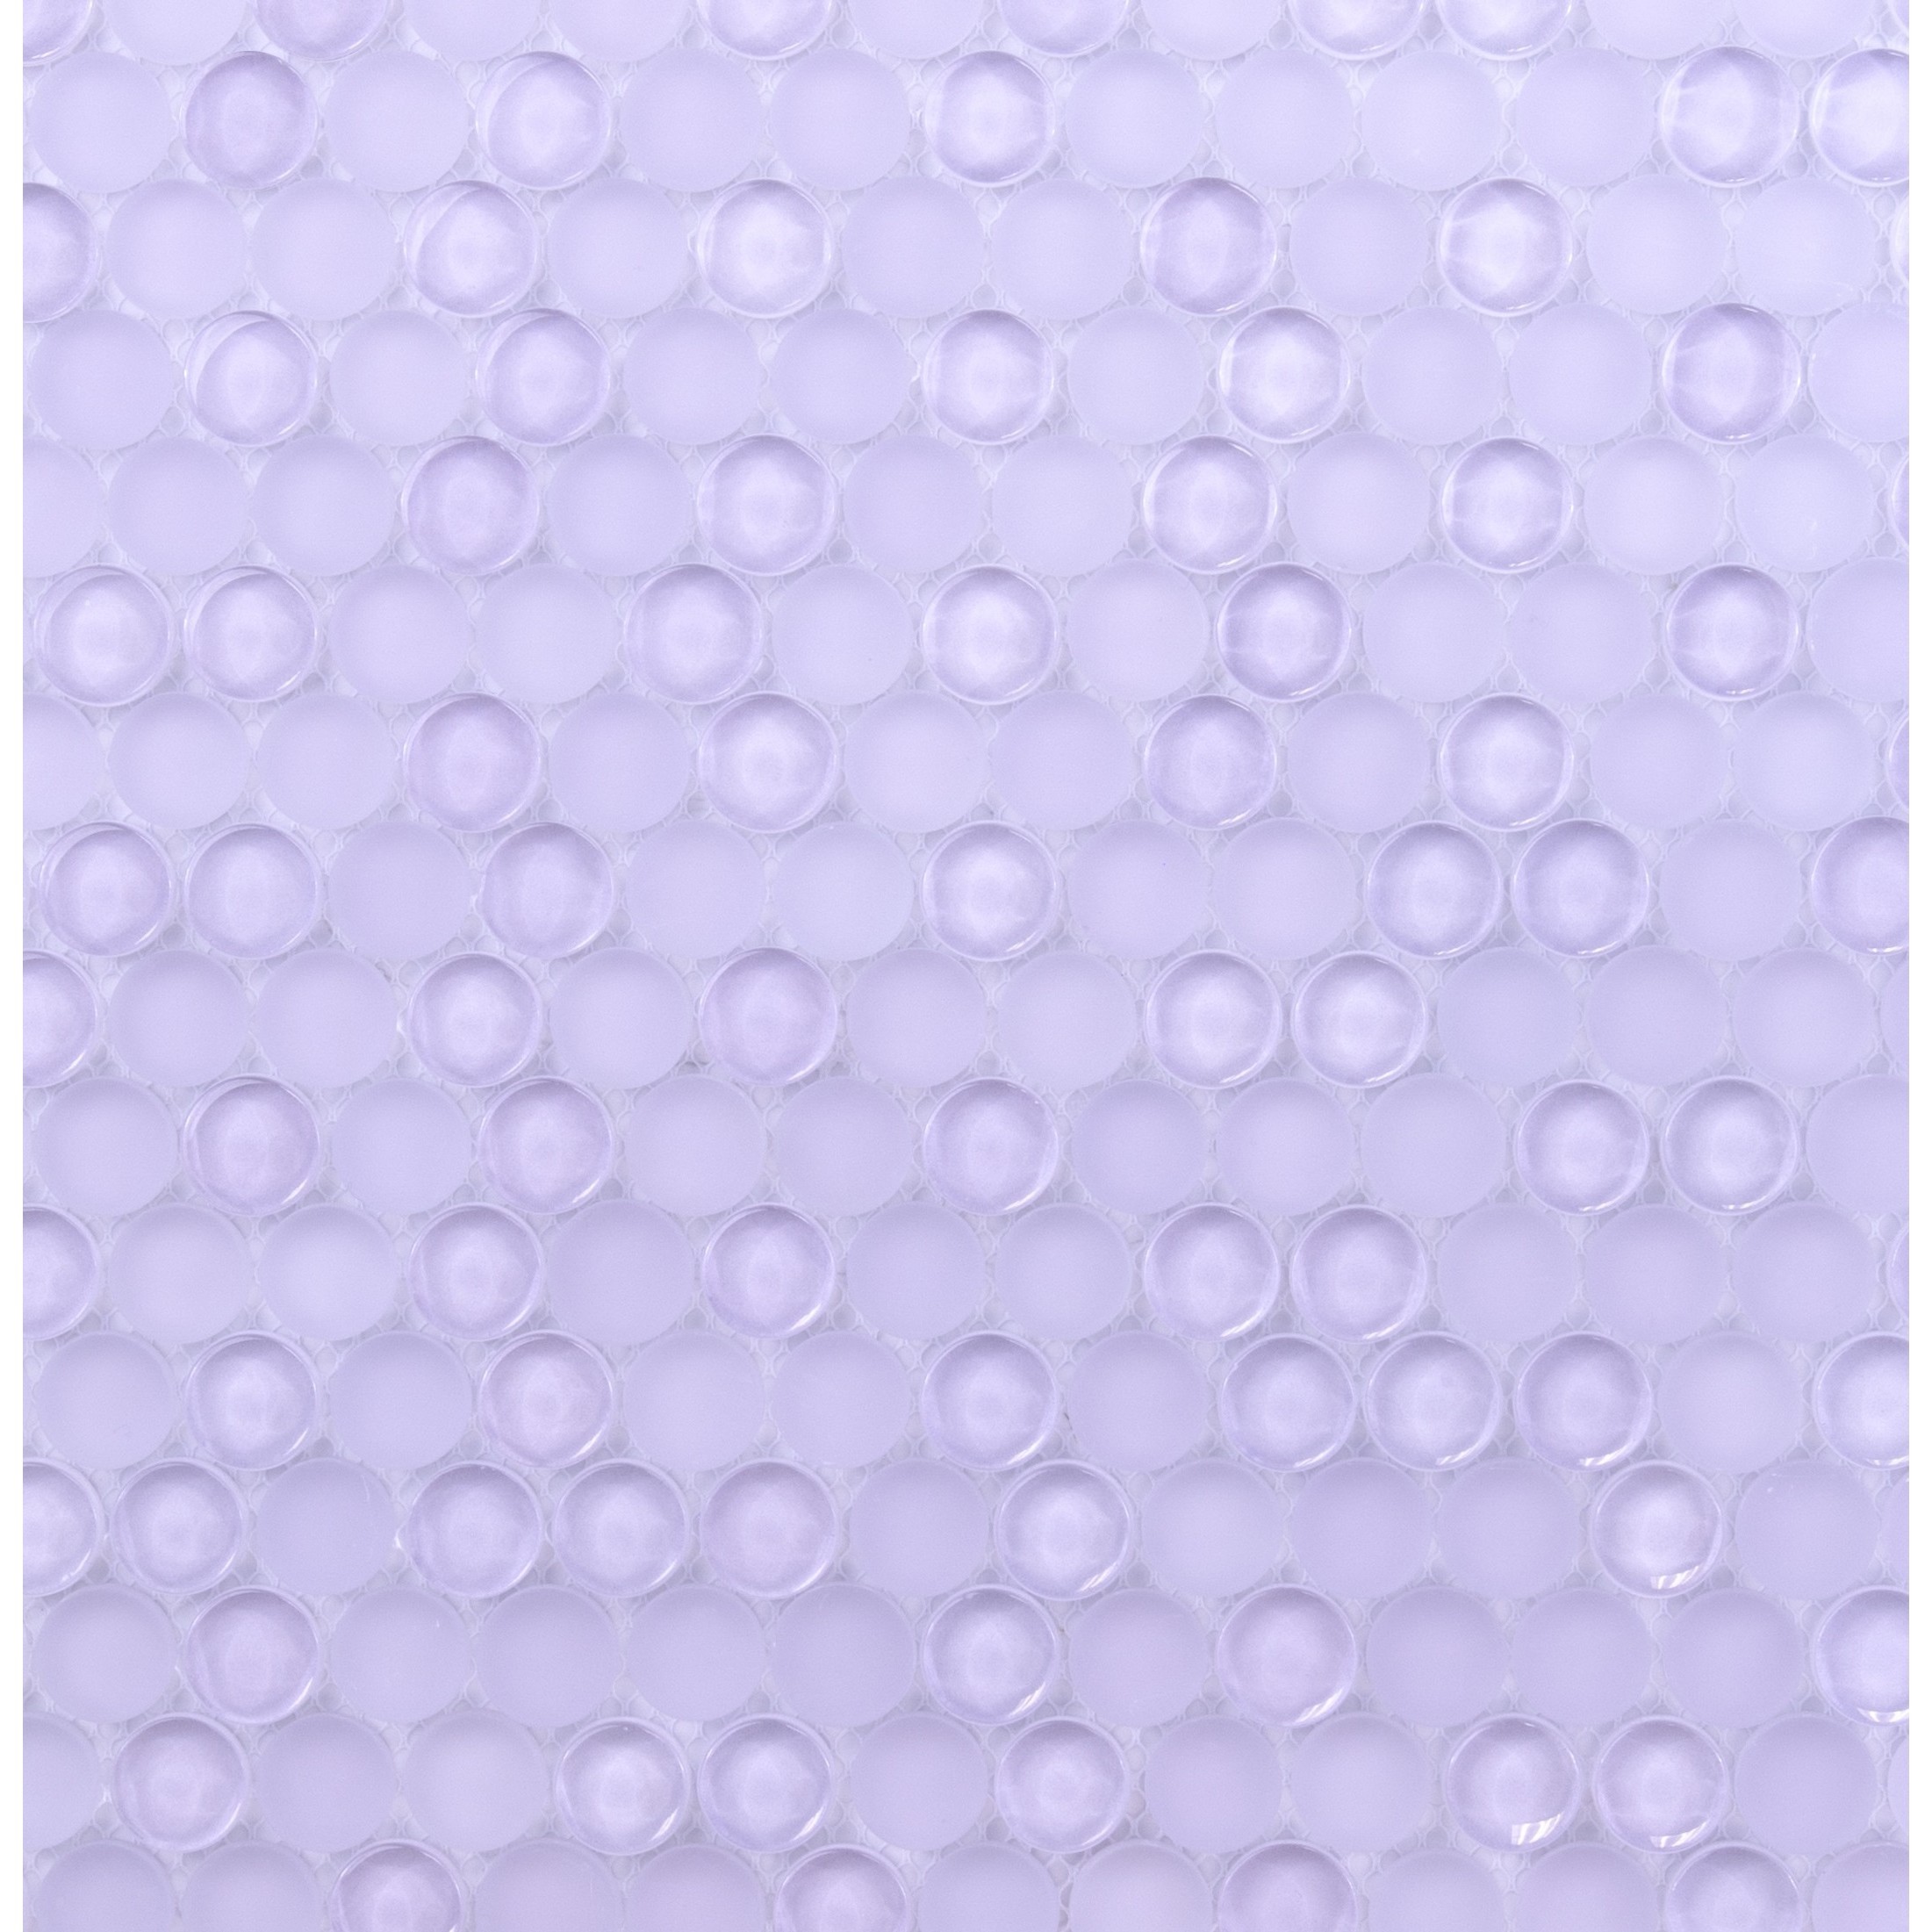 Shop for loft wisteria penny round glass tiles at 2